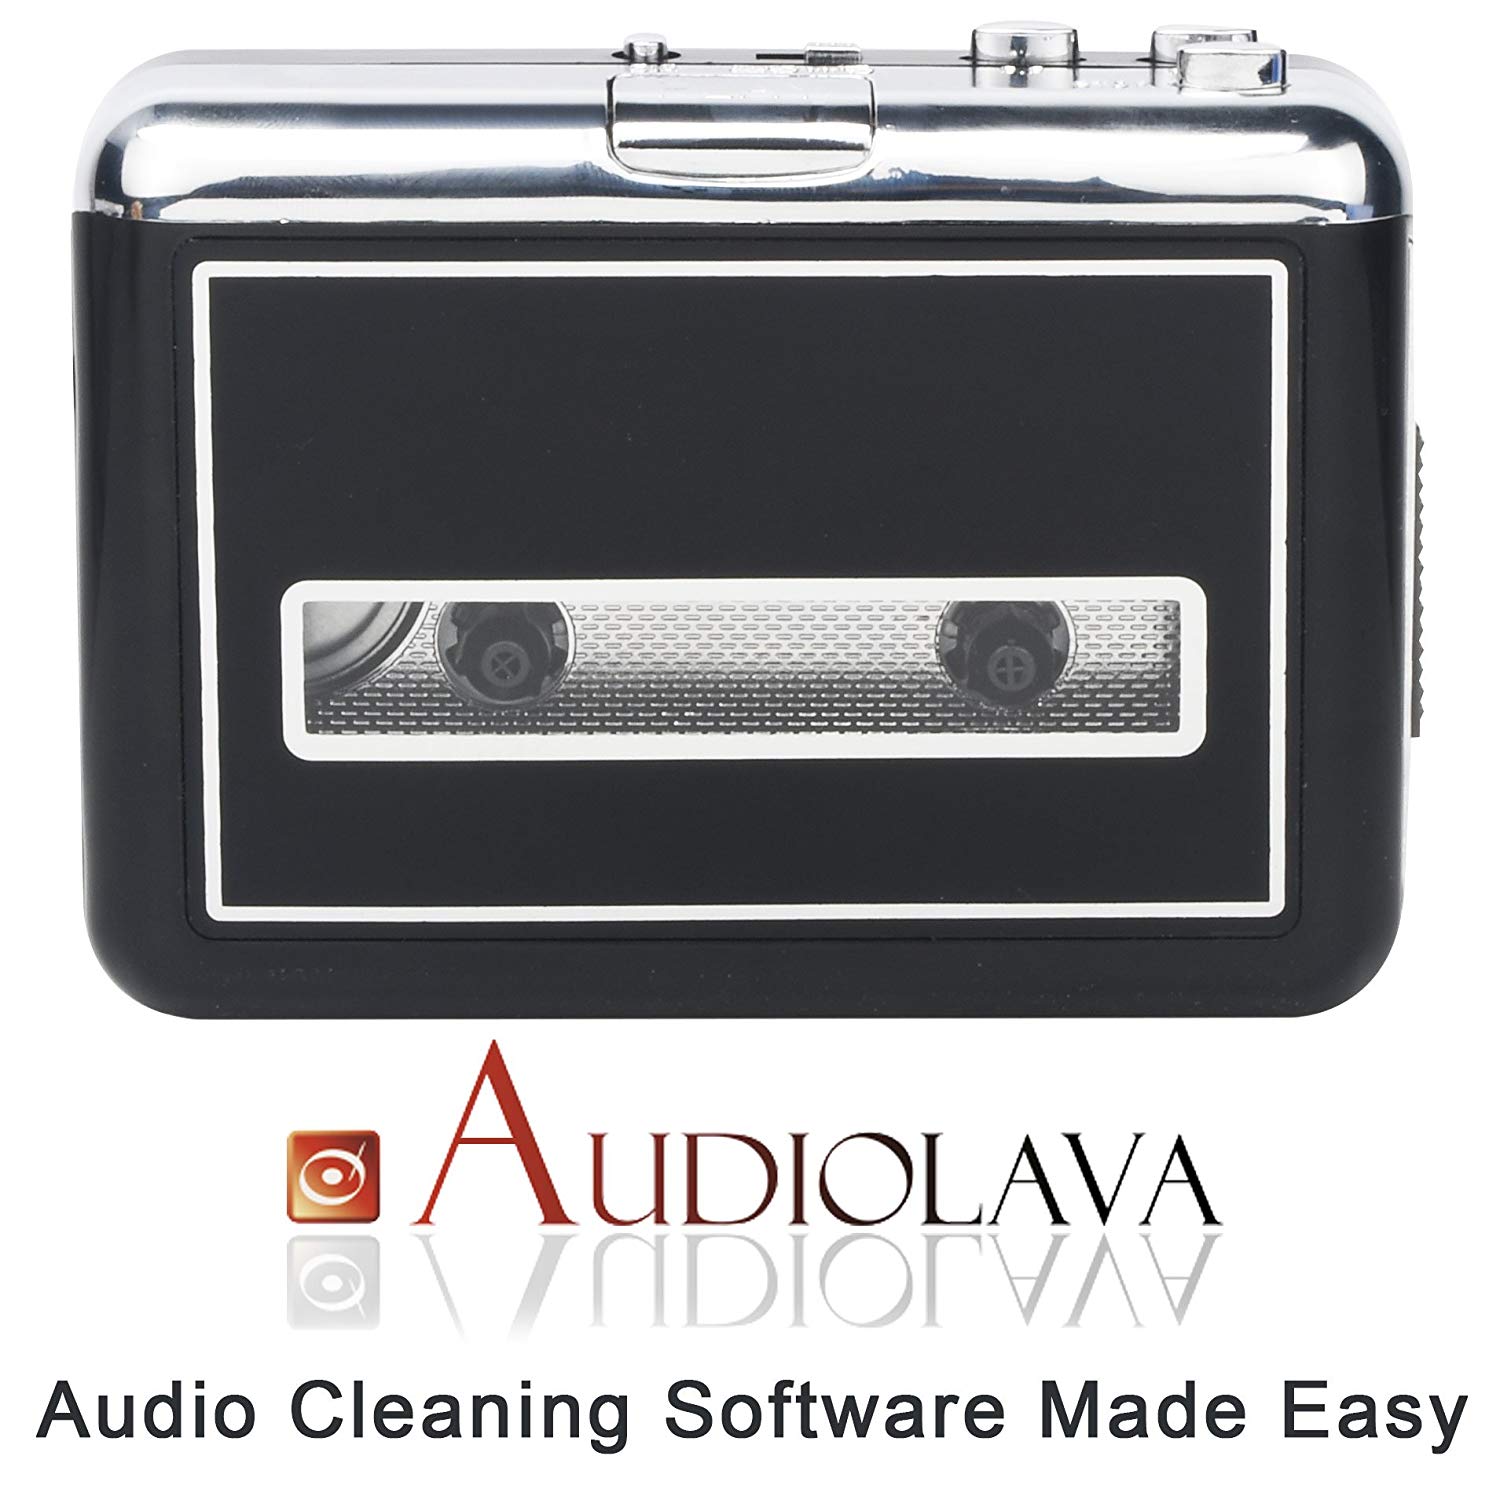 Portable Cassette Player Converter Converts Tapes to Digital MP3 Walkman Player with New Upgrade Convenient Software AudioLAVA 